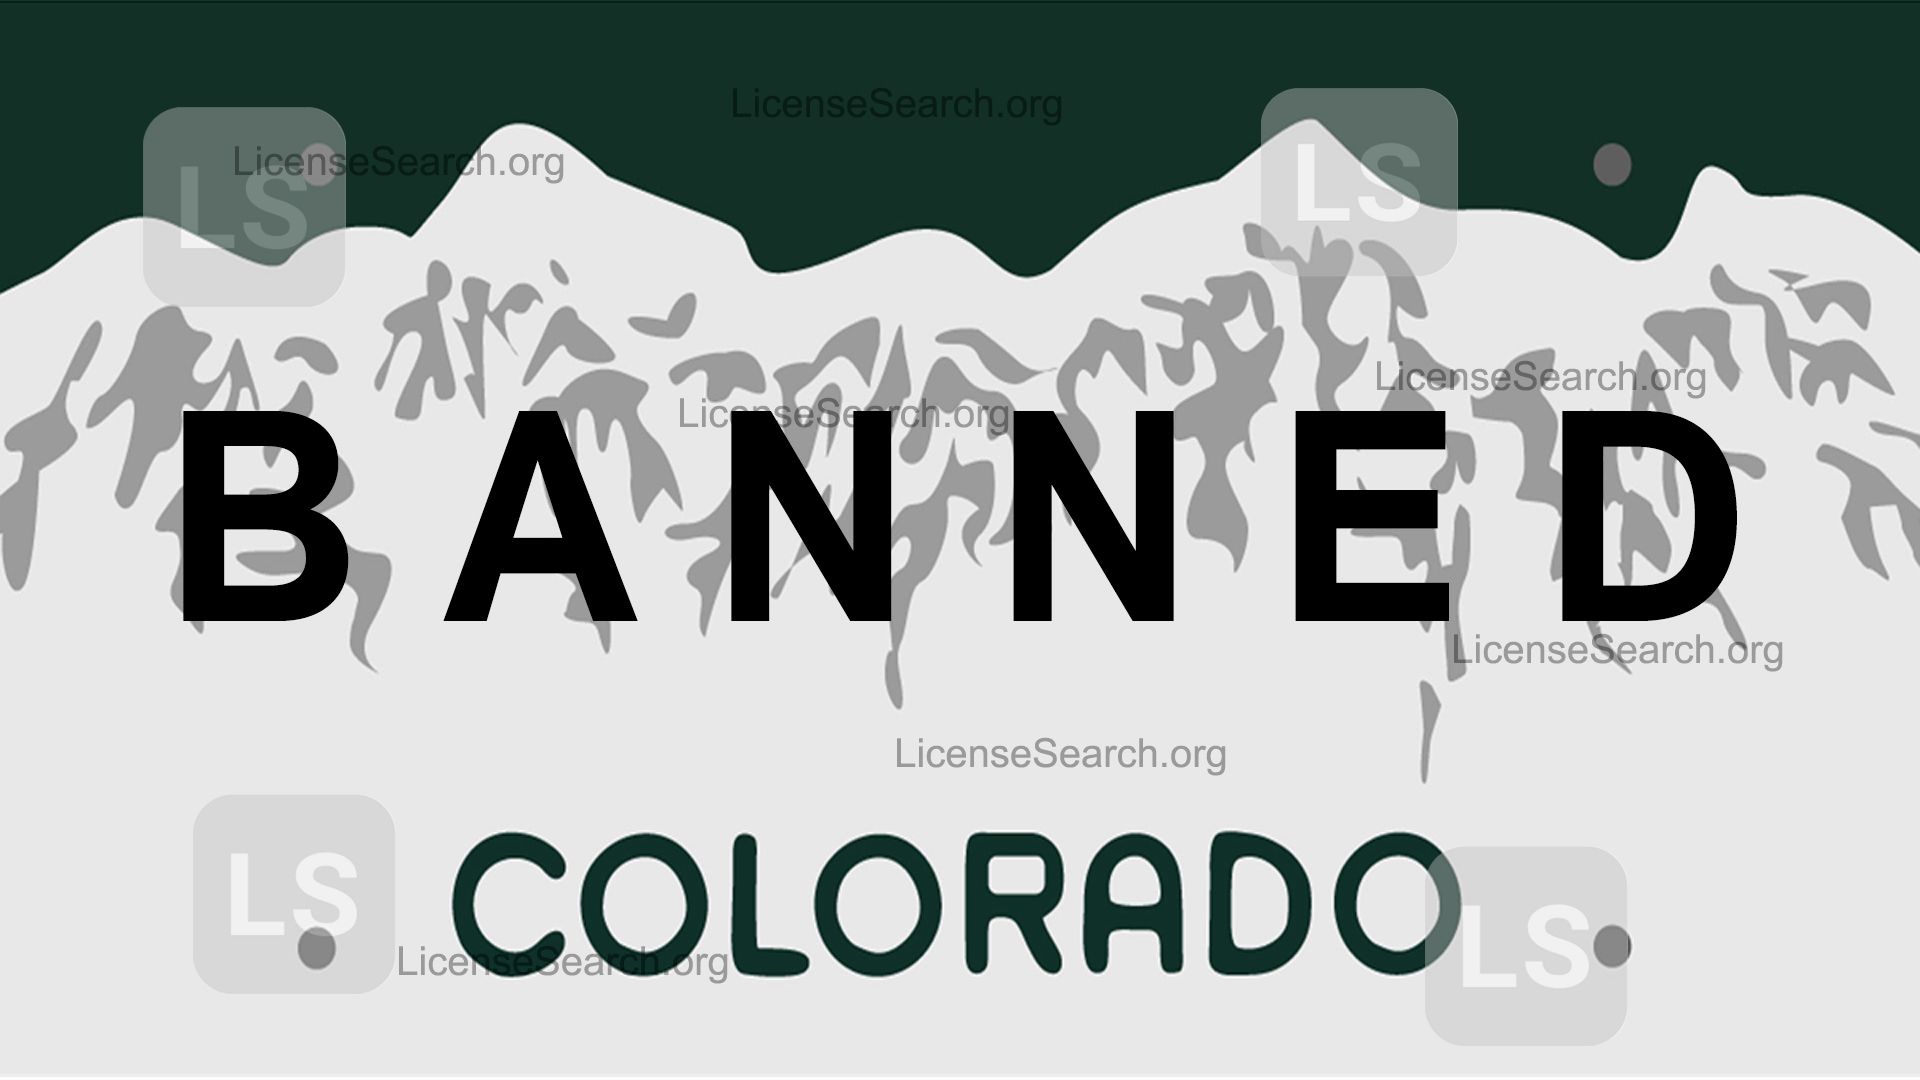 The Colorado personalized license plates that got rejected